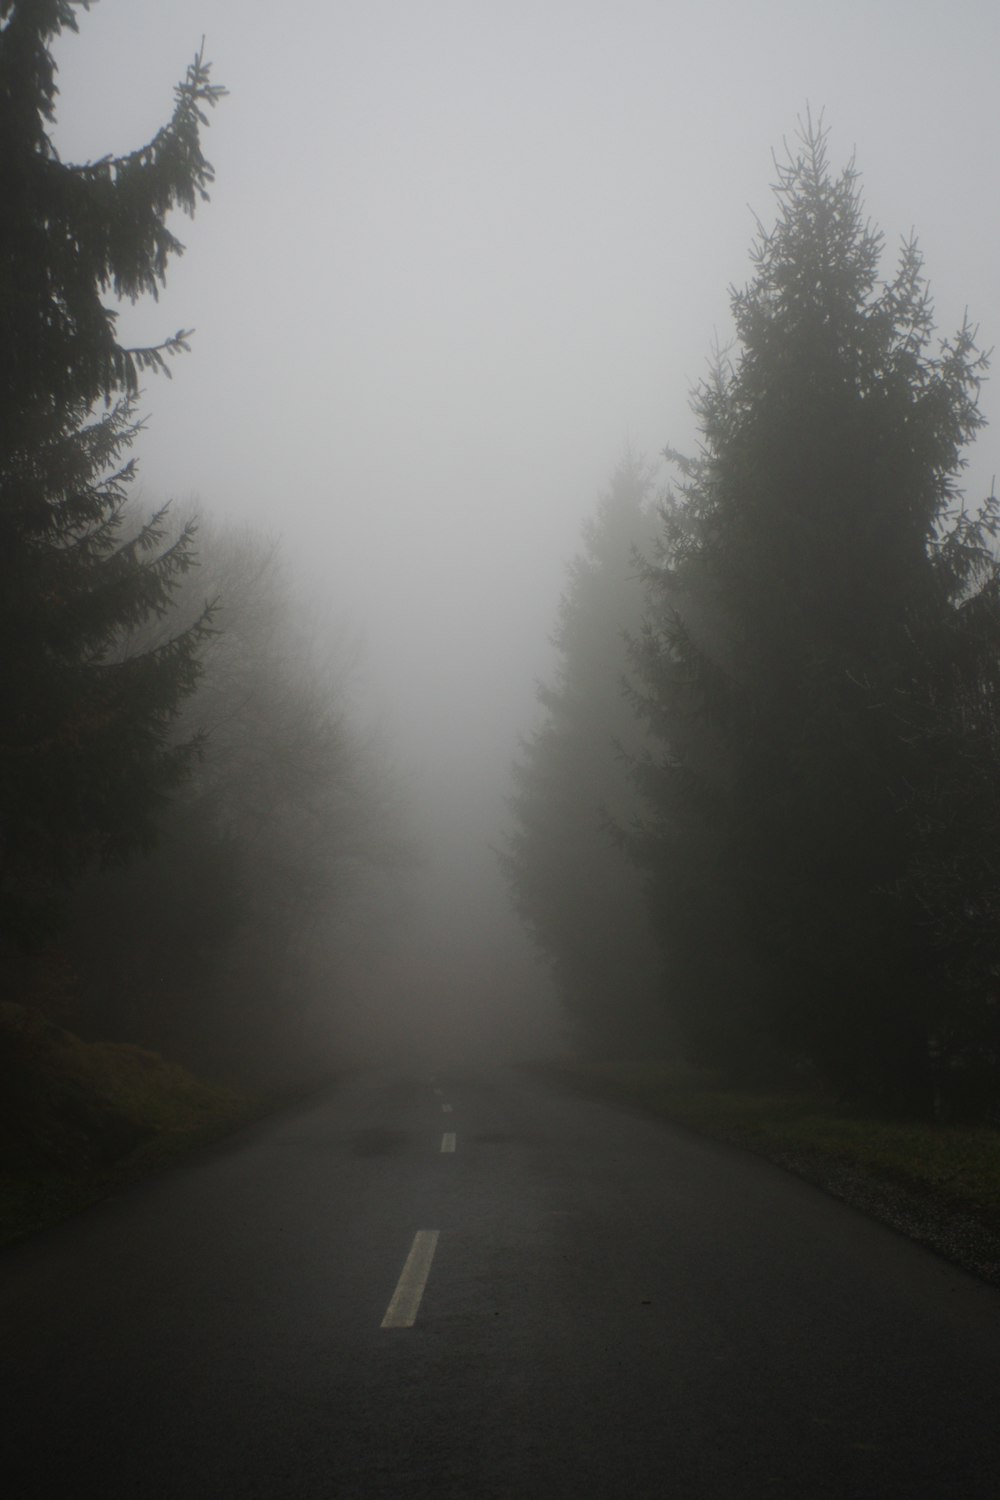 gray asphalt road between green trees during foggy day